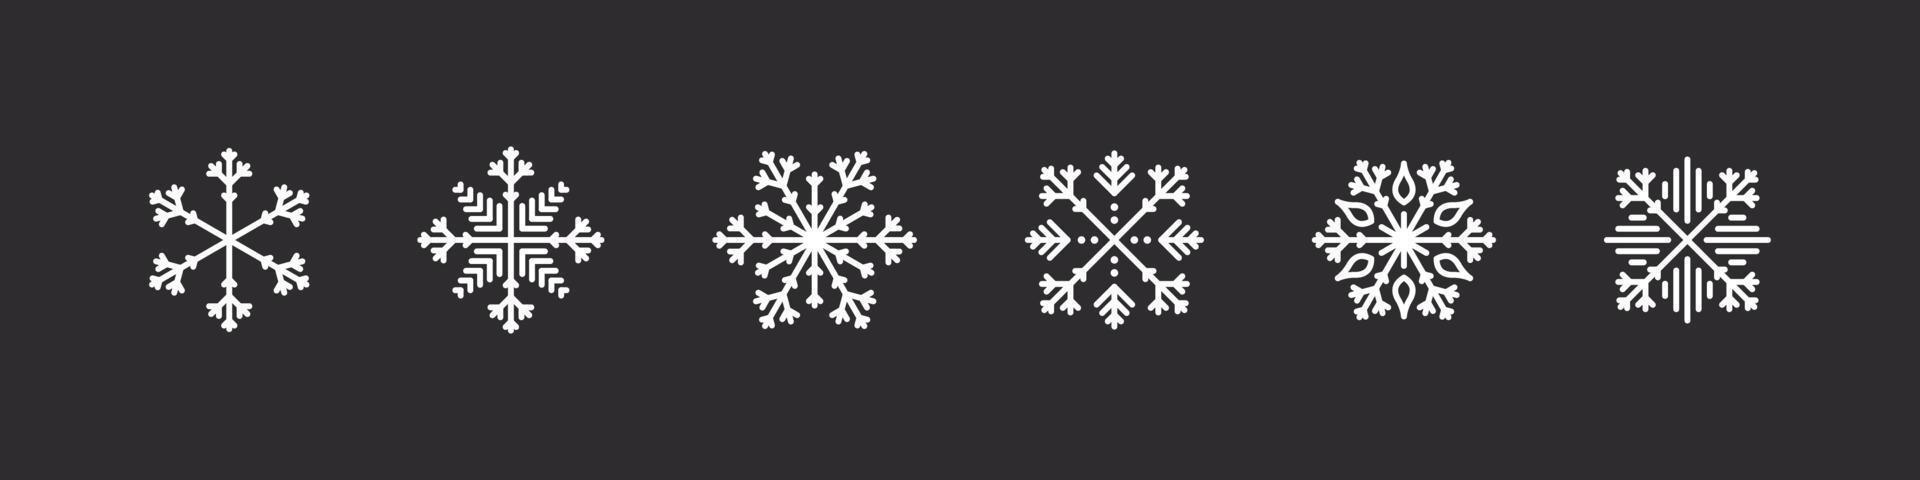 Snowflakes icons. White snowflakes on a dark background. Xmas signs. Collection of high quality snowflakes. Vector illustration